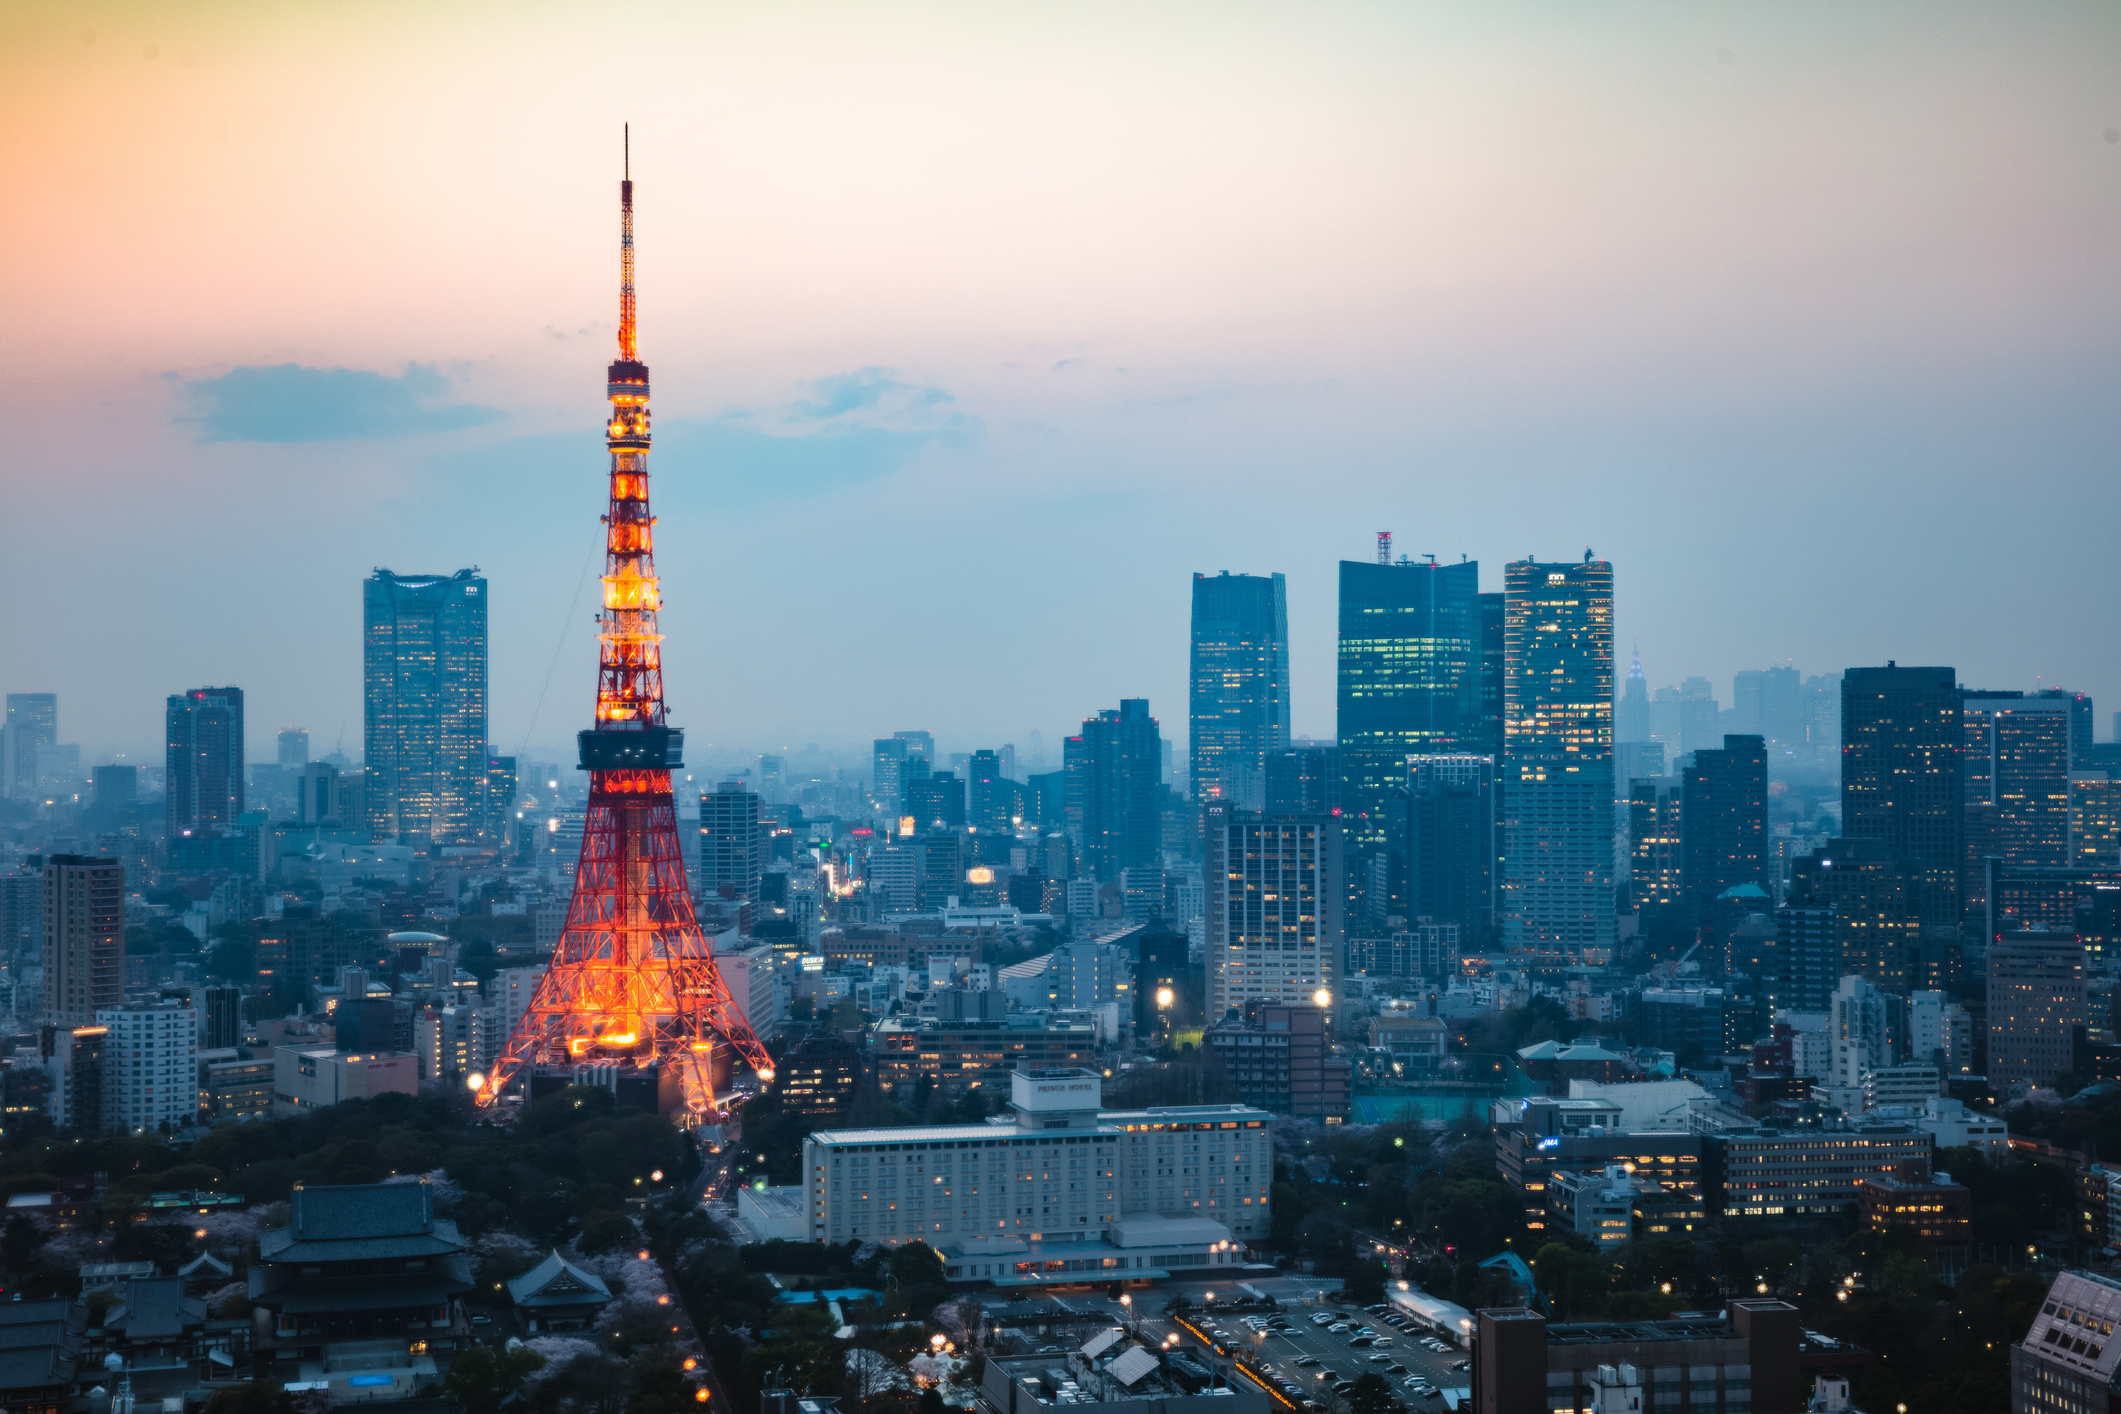 Tokyo tower and downtown district at dusk